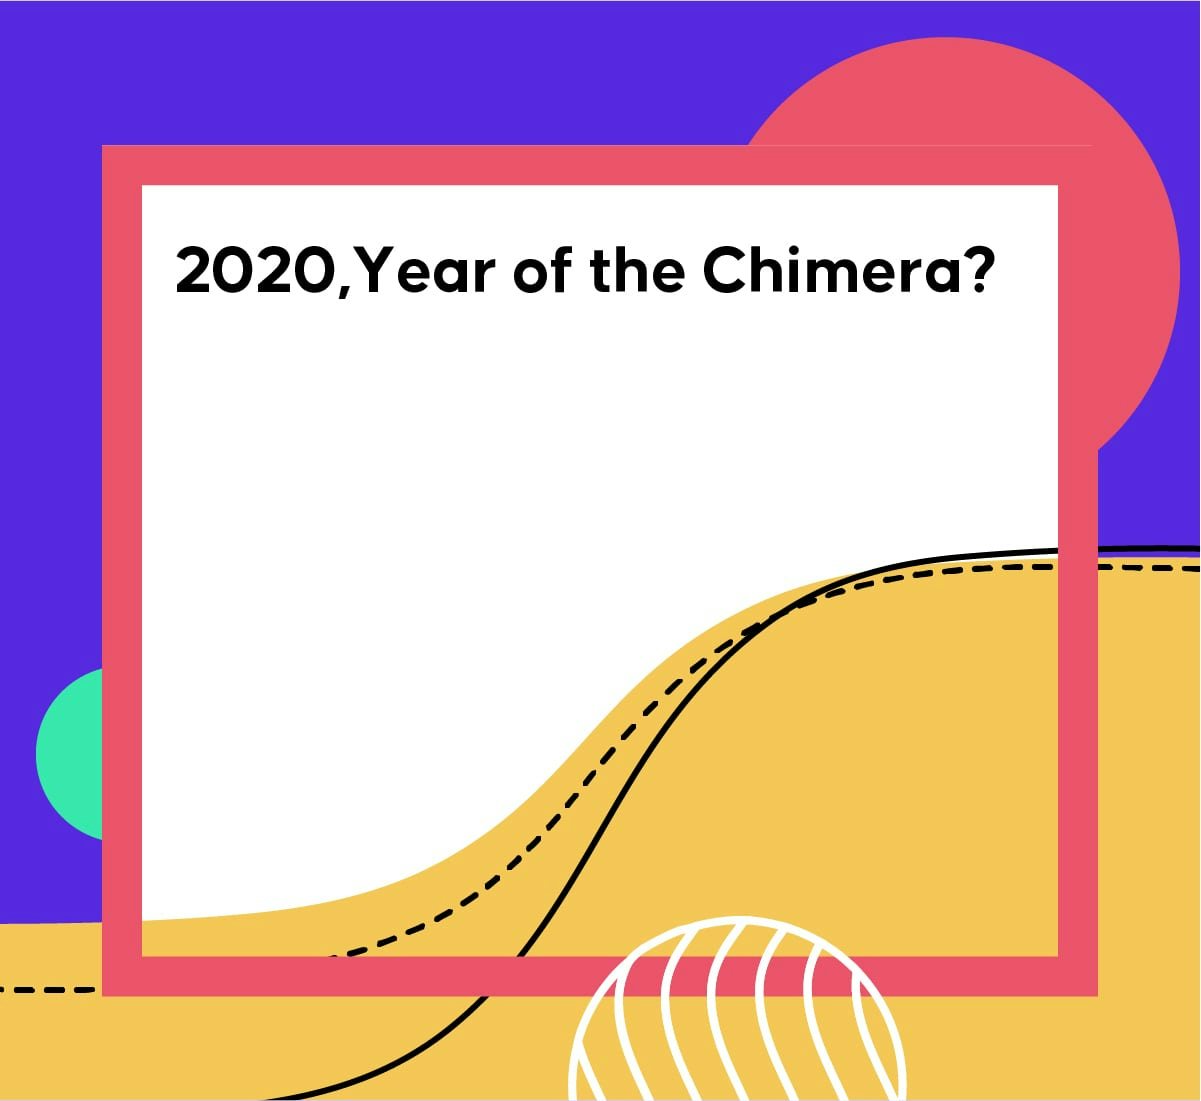 Cover image of Drug Hunter article "2020, Year of the Chimera?"